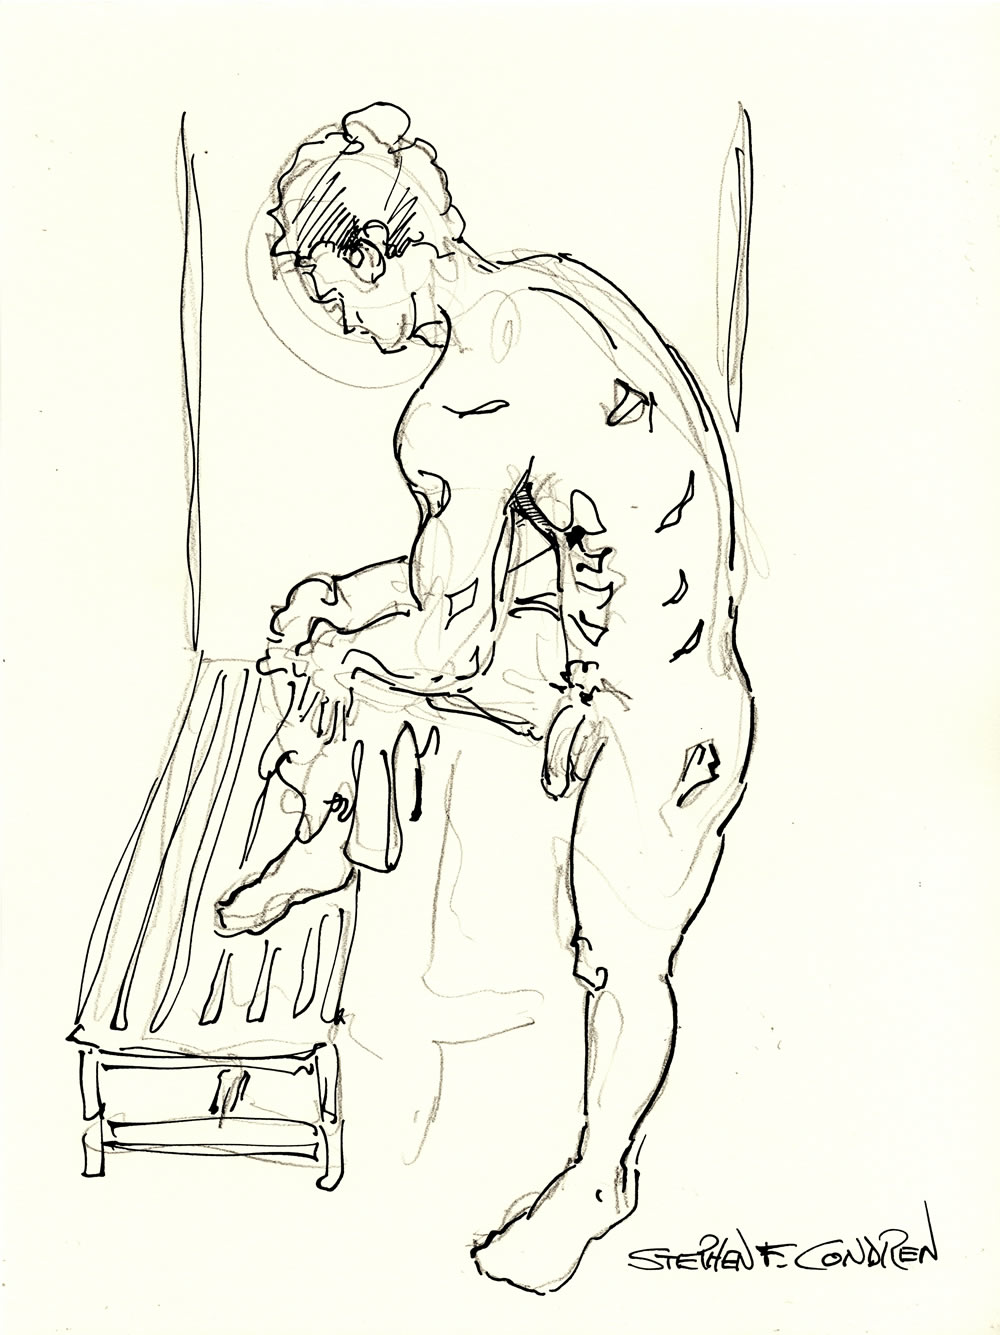 Pen & ink figure drawing of a nude male with long penis. He has a muscular body with a 6-pack set of abs and firm pecs.